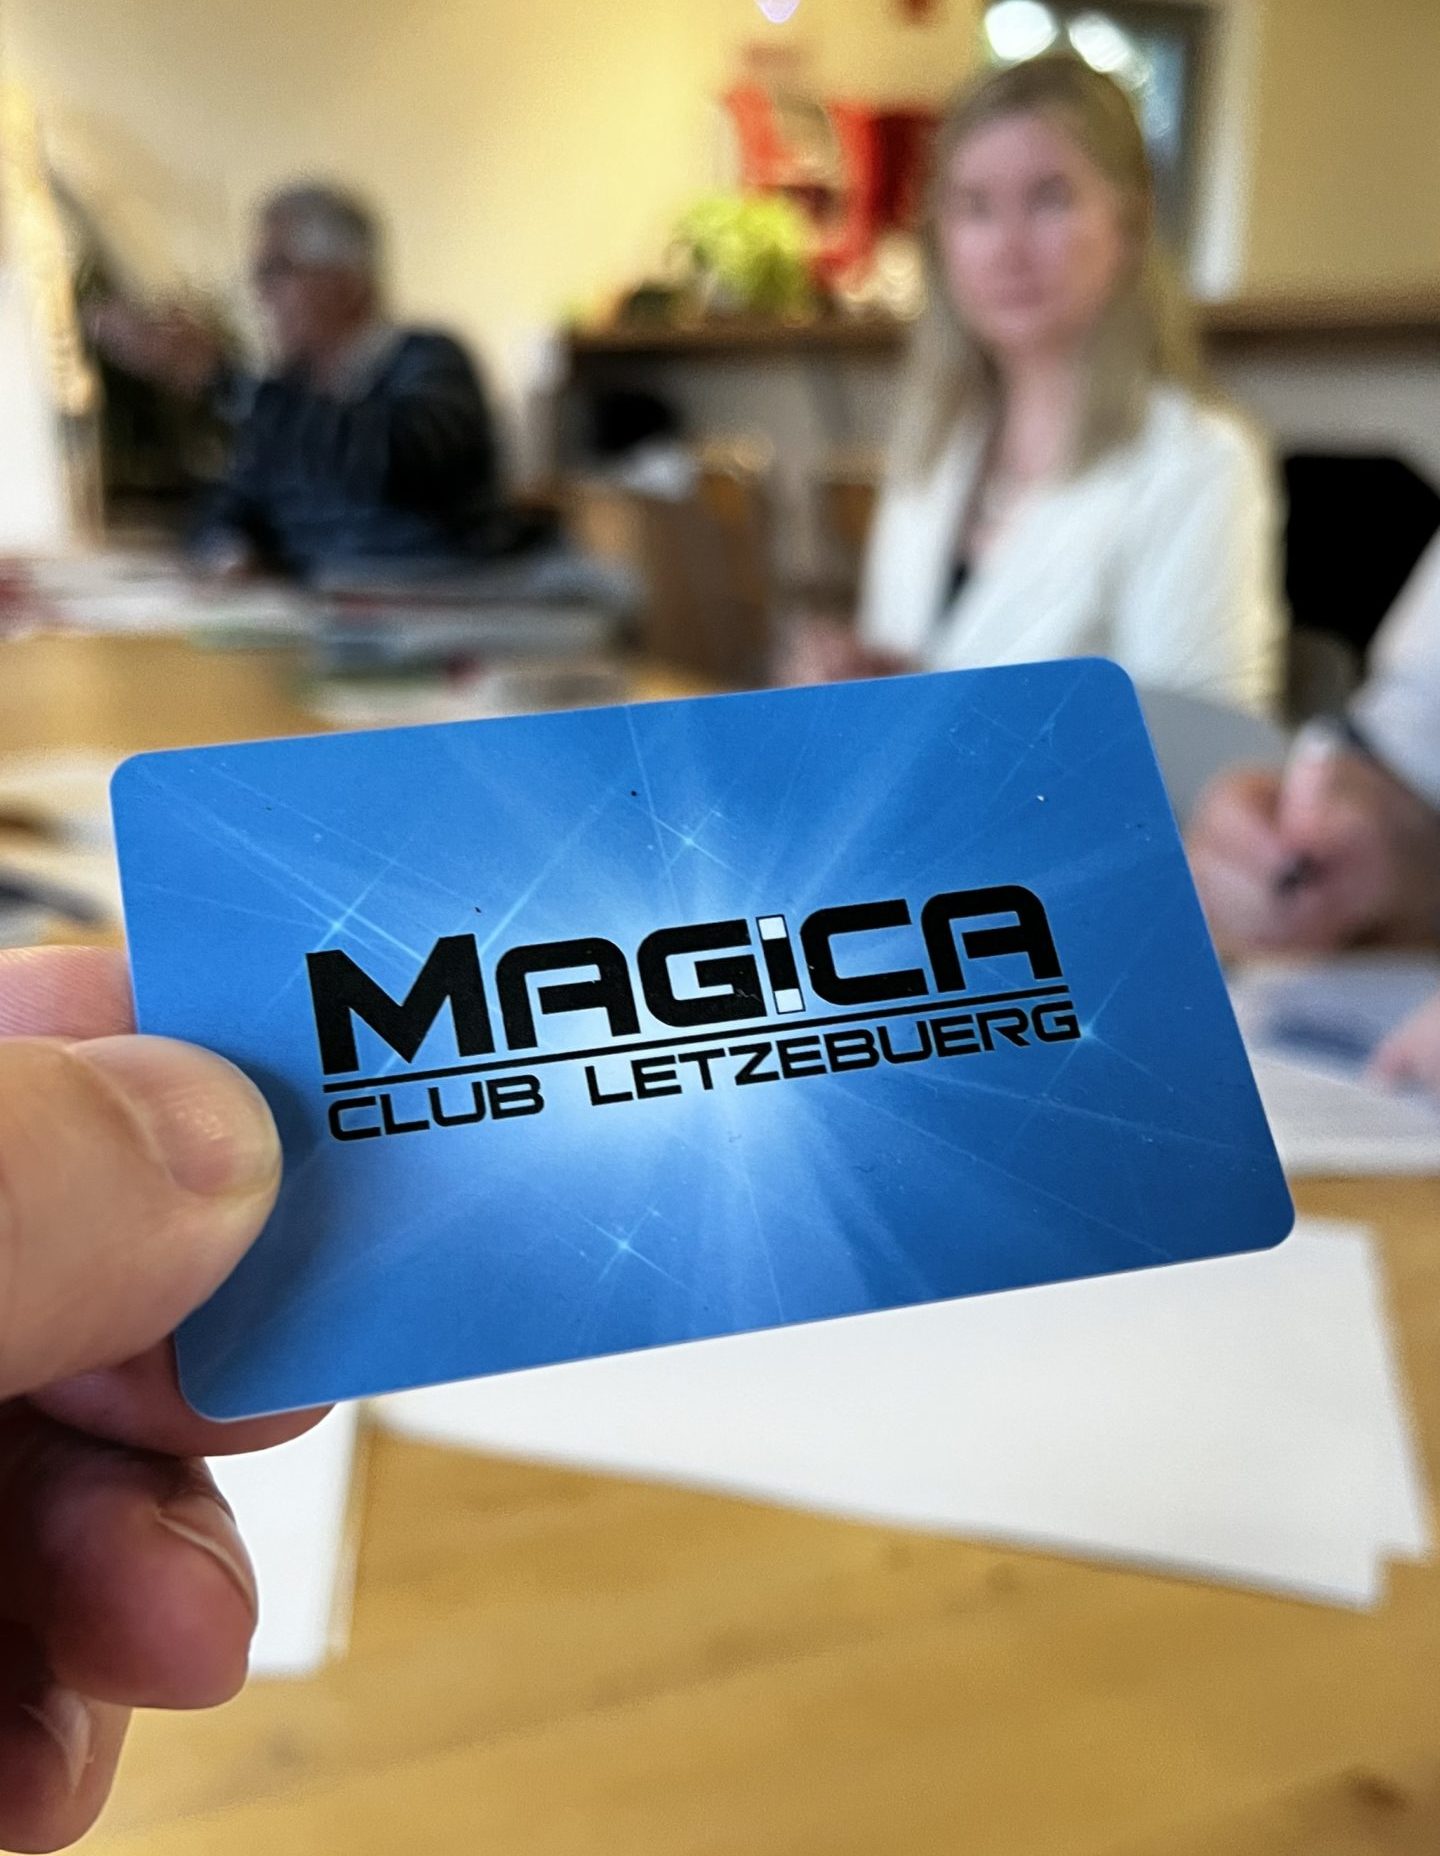 The General Assembly of the Magica Club Letzebuerg occurred on 19th April.